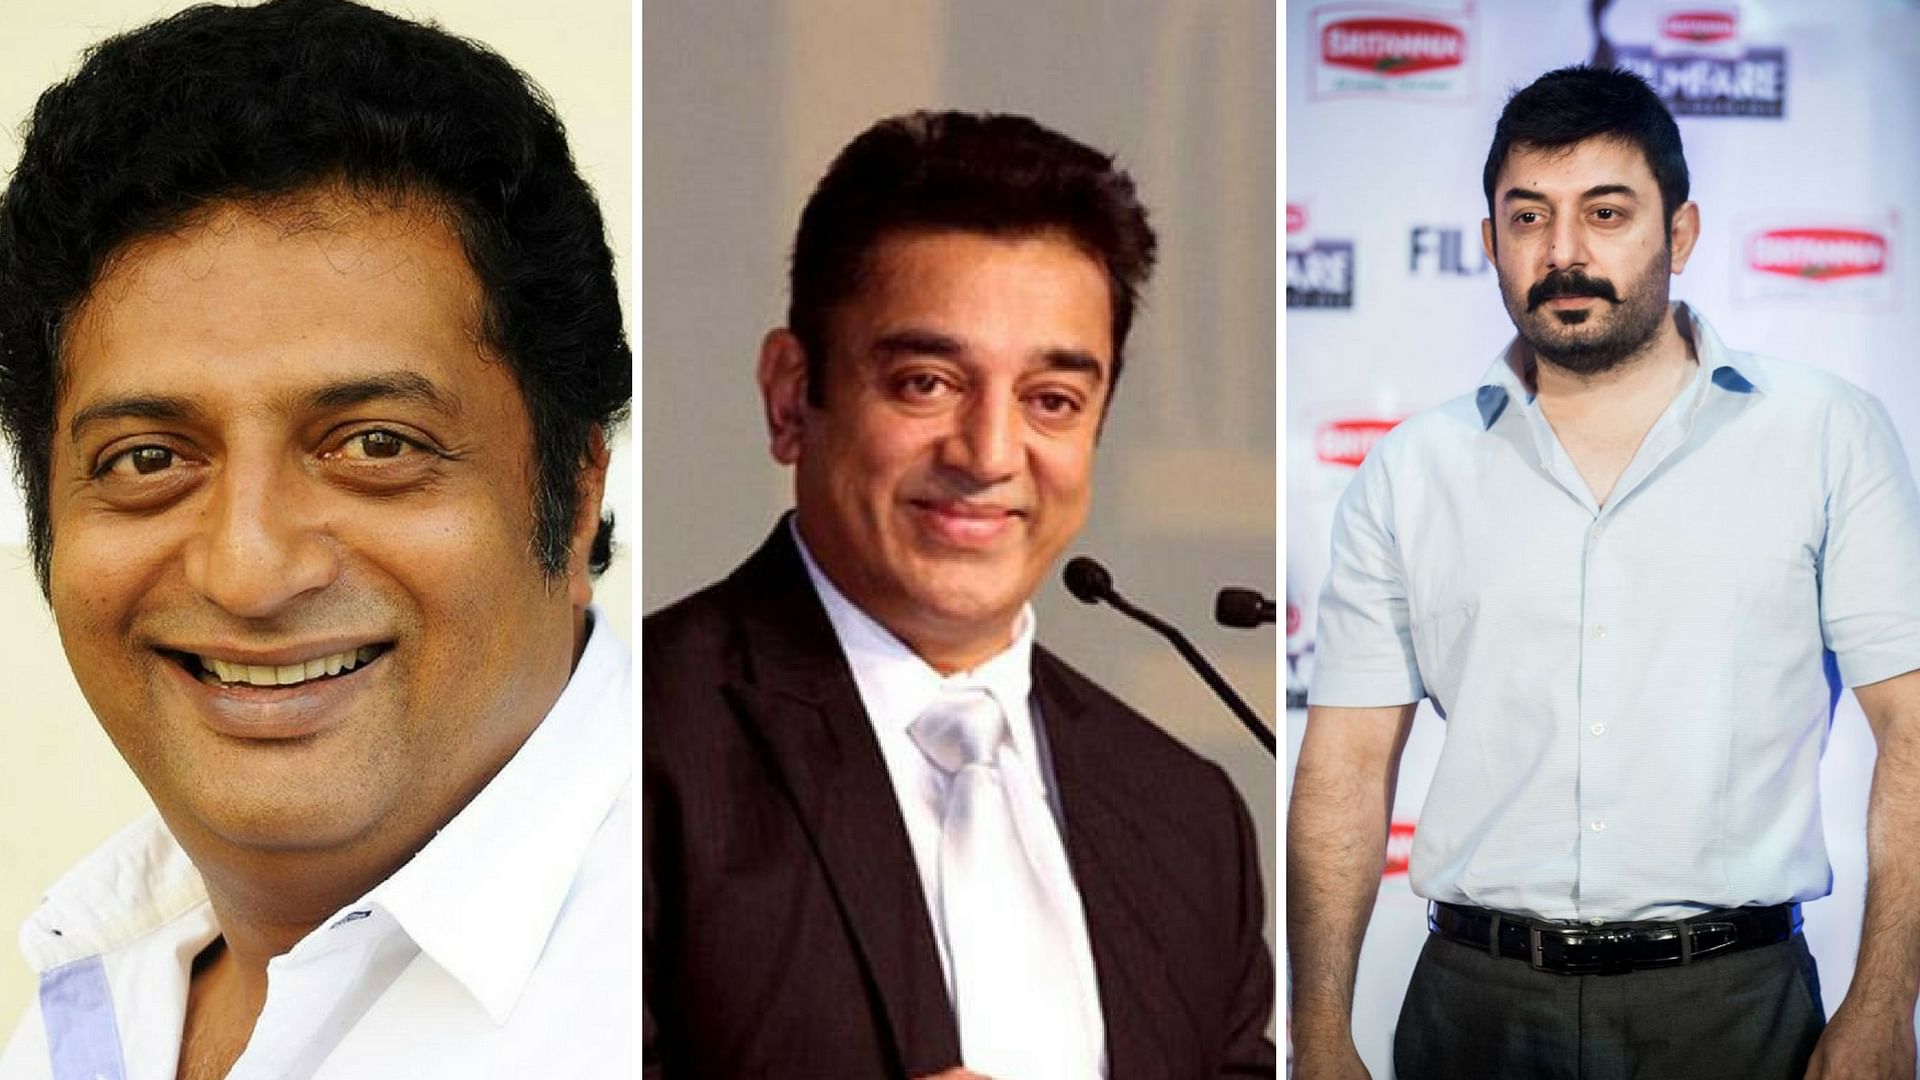 Prakash Raj and Kamal Haasan have been very vocal about political incidents recently.